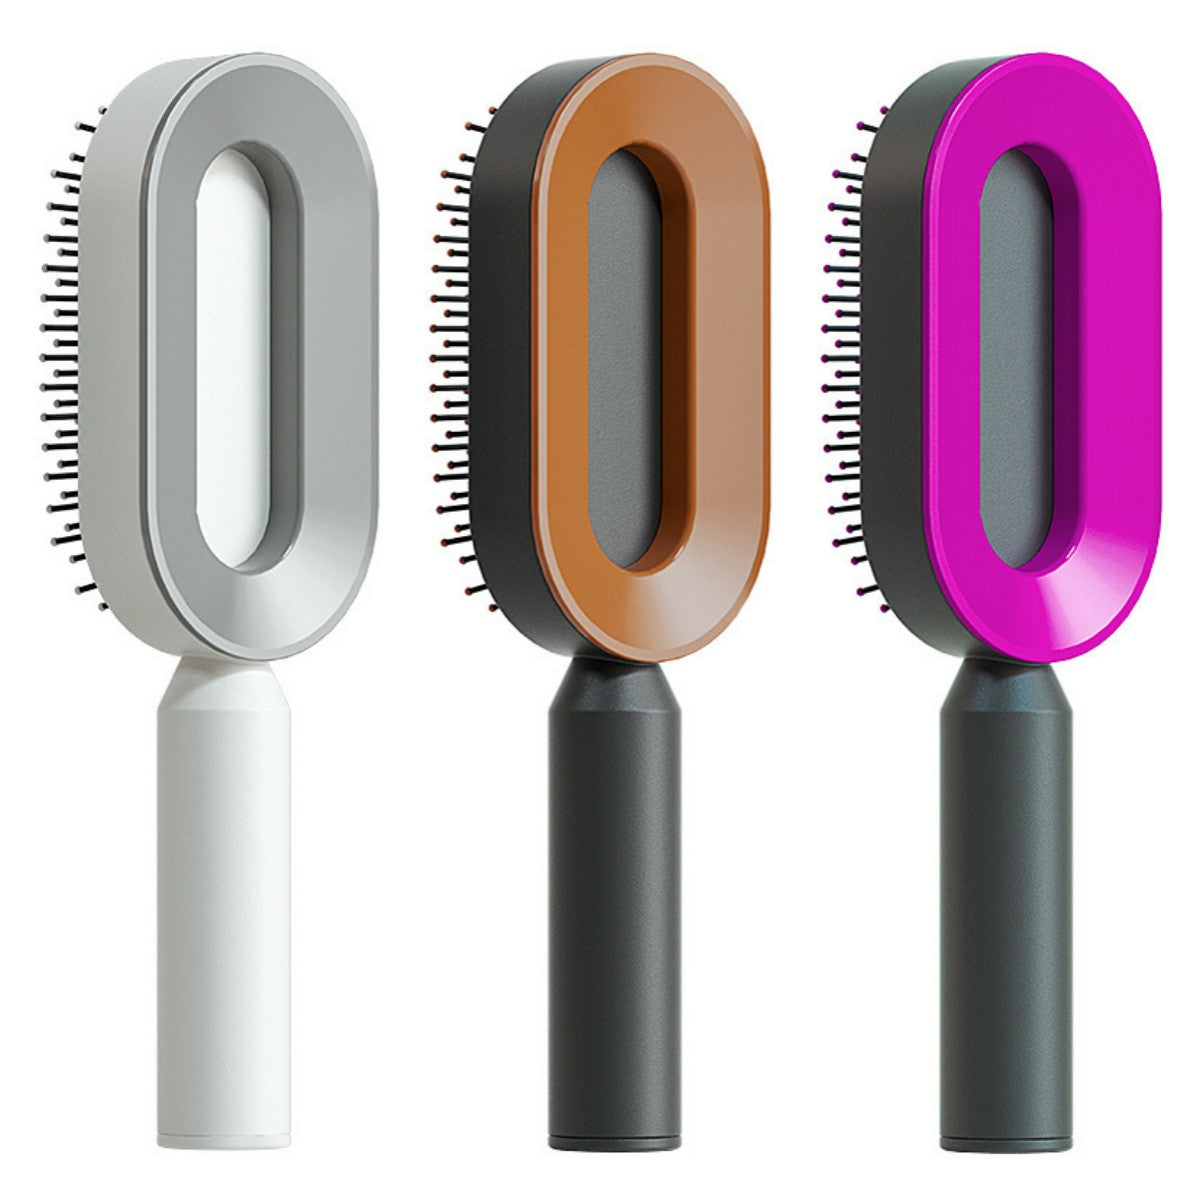 Self Cleaning Hair Brush For Women One-key Cleaning Hair Loss Airbag Massage Scalp Comb Anti-Static Hairbrush Set Z